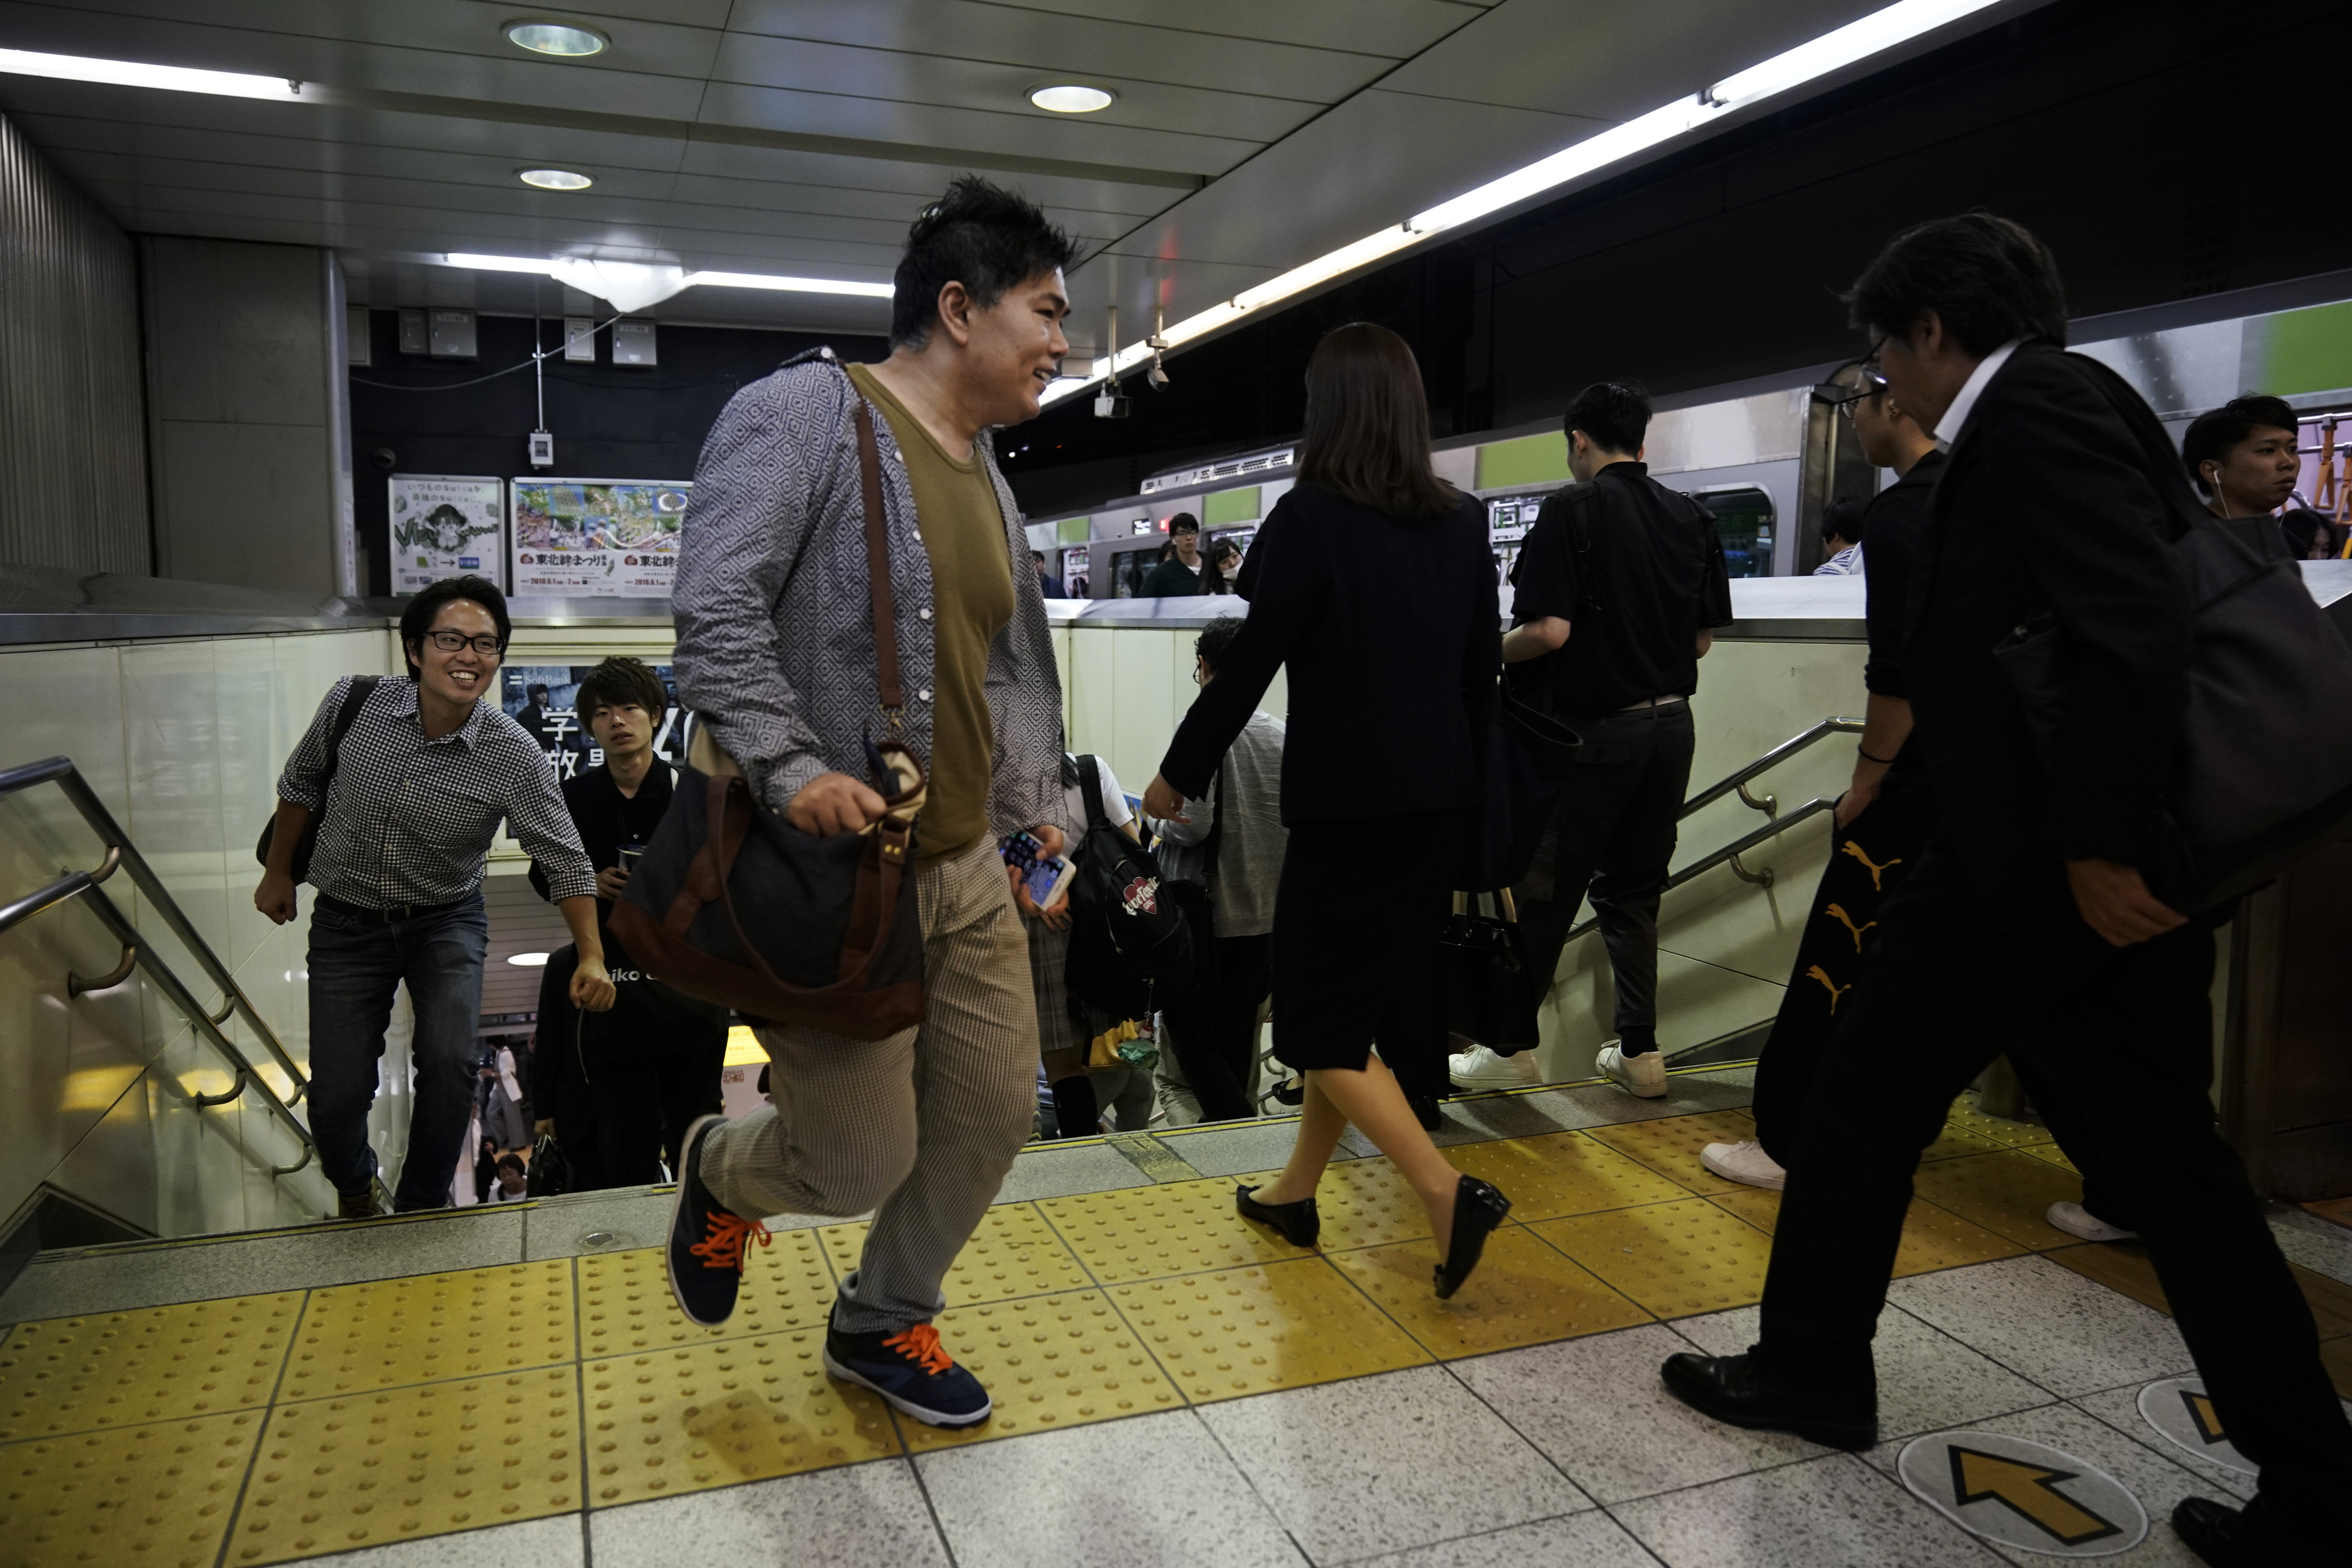 In this Friday, May 24, 2019, photo, two commuters run up the steps to catch a Yamanote Line train at Shinjuku Station in Tokyo. Want to take a glimpse of daily life in downtown Tokyo? Take a ride on the Yamanote loop line. For most Tokyoites, the line means an incredibly punctual and efficient transportation system for commuting. For tourists, it offers a glimpse into the life of ordinary people living in the city. (AP Photo/Jae C. Hong)